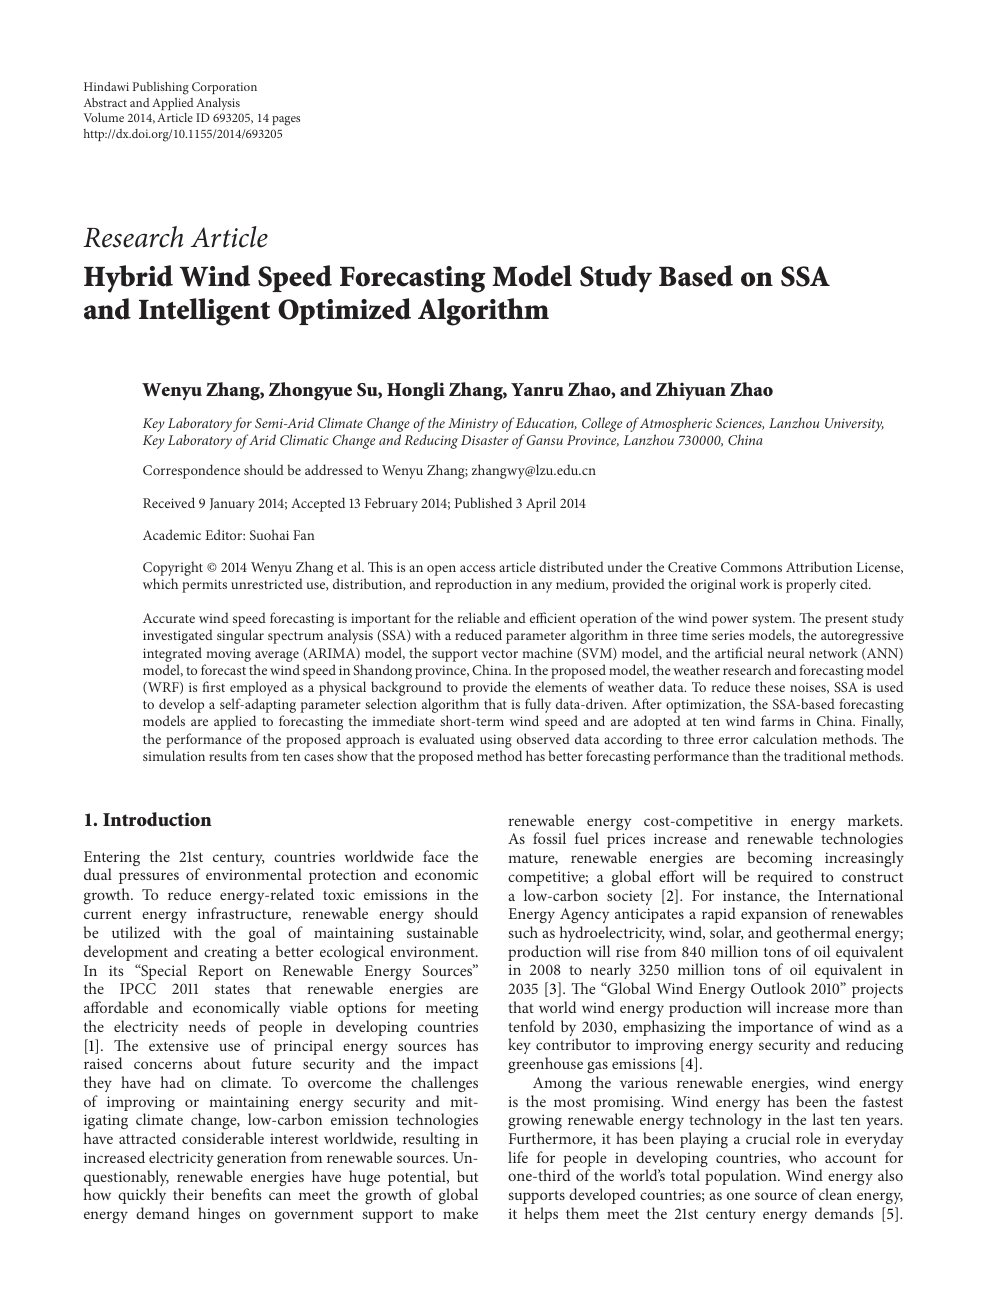 Hybrid Wind Speed Forecasting Model Study Based On Ssa And Intelligent Optimized Algorithm Topic Of Research Paper In Mathematics Download Scholarly Article Pdf And Read For Free On Cyberleninka Open Science